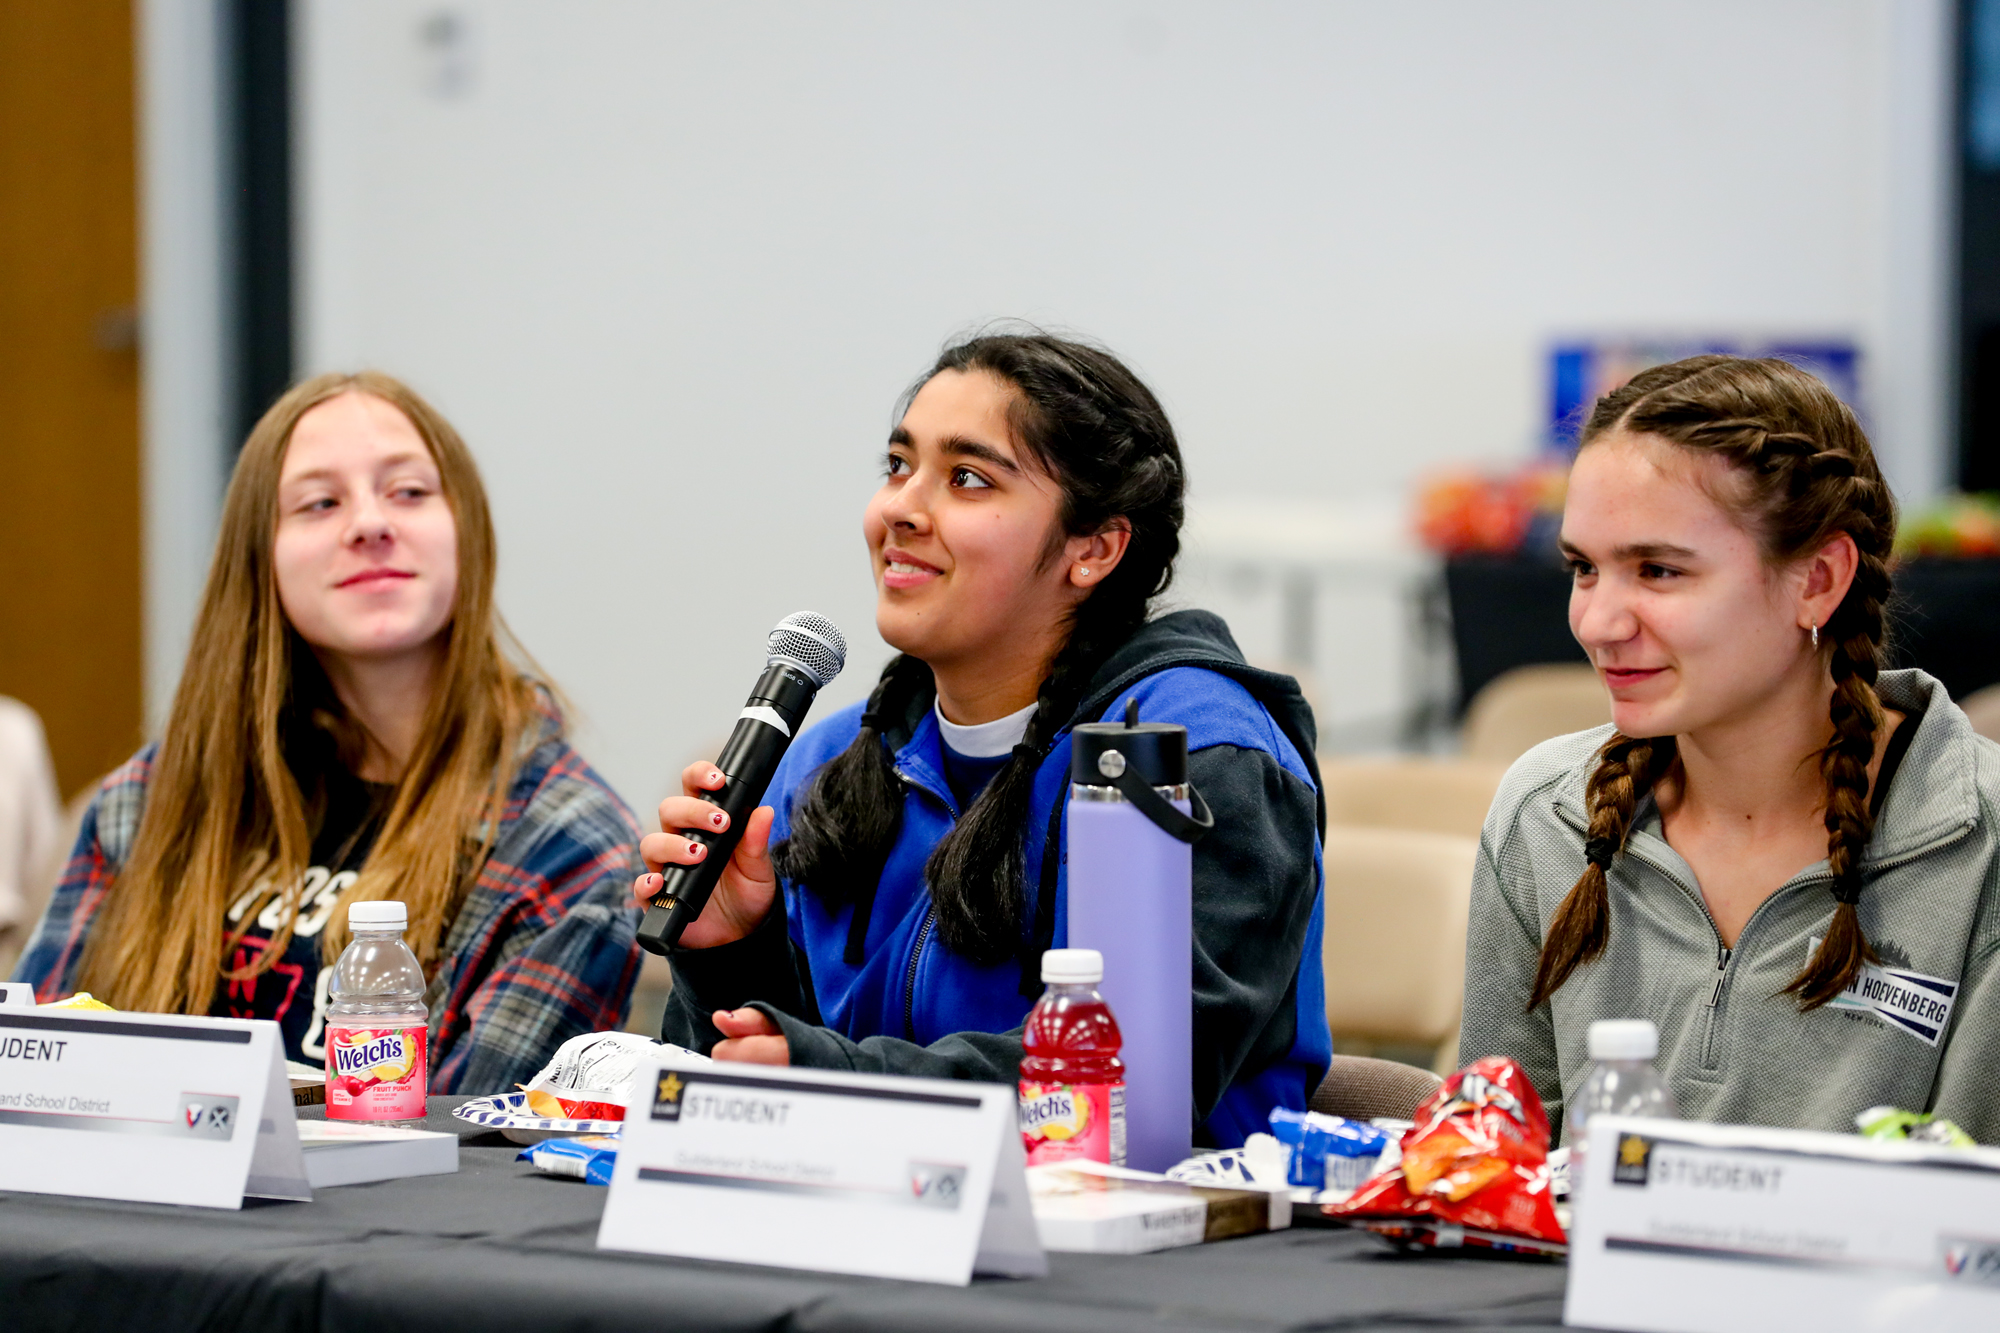 Three GHS students are seated at a table with name plates in front of them. The one in the middle is speaking into a microphone. The student to the left is looking at the speaker